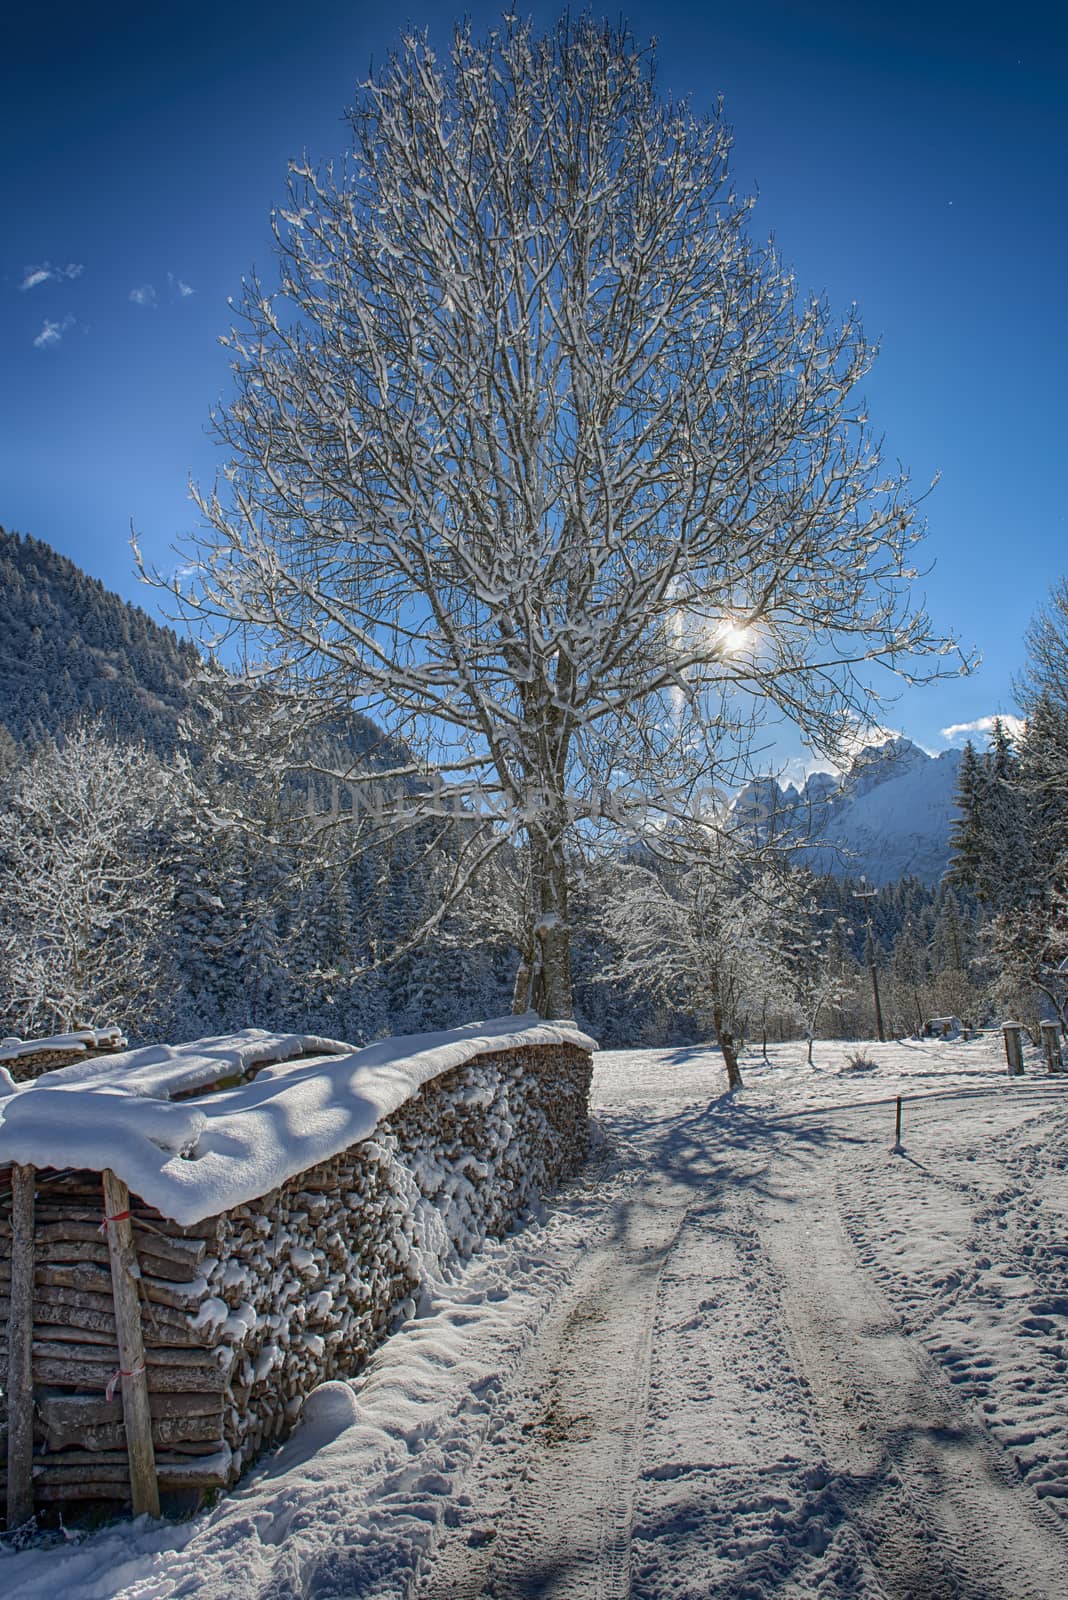 a snow-covered landscape in an alpine valley